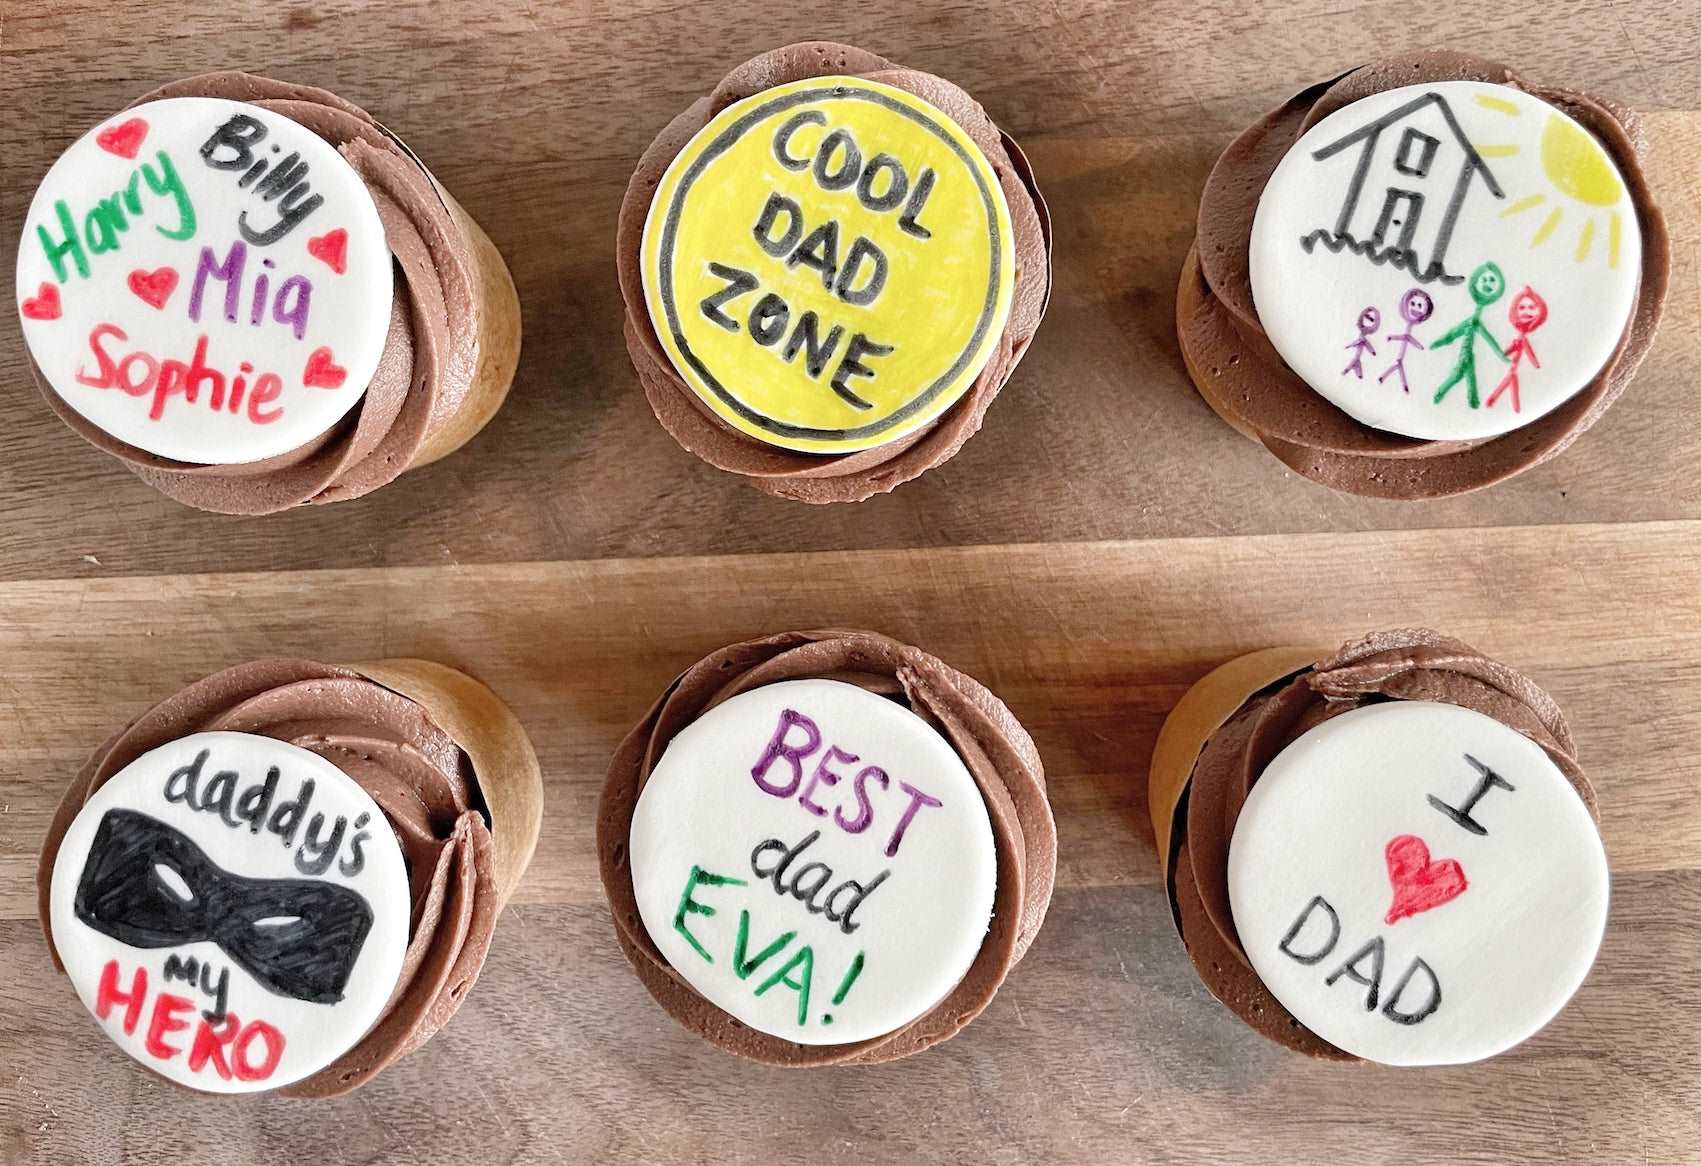 Fathers Day Cupcake Kit, Fathers Day Present, Fathers Day Gift, Fathers Day Cupcakes, Draw On Cupcakes, Daddy's My Hero, Best Dad Ever, I love Dad, Cool Dad Zone, Personal Message Cupcakes